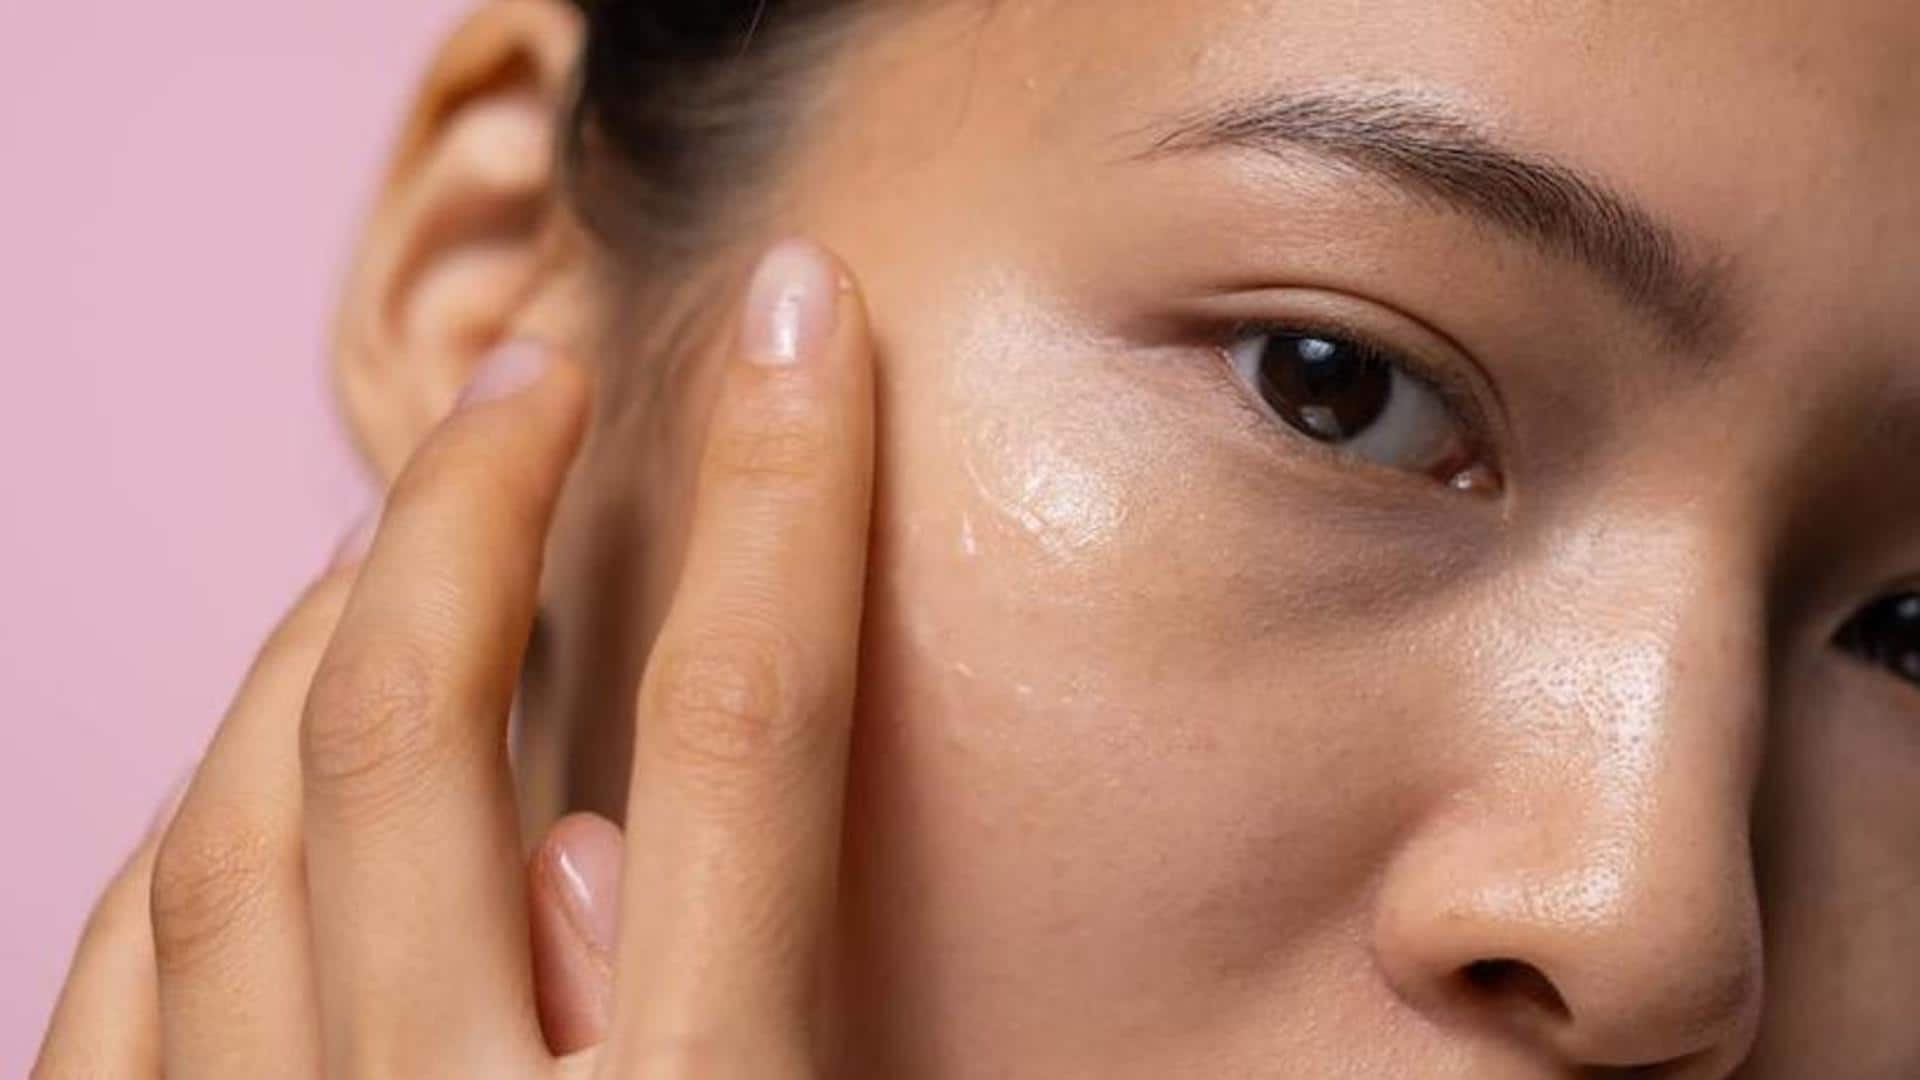 Is your face producing excessive oil? Note these factors